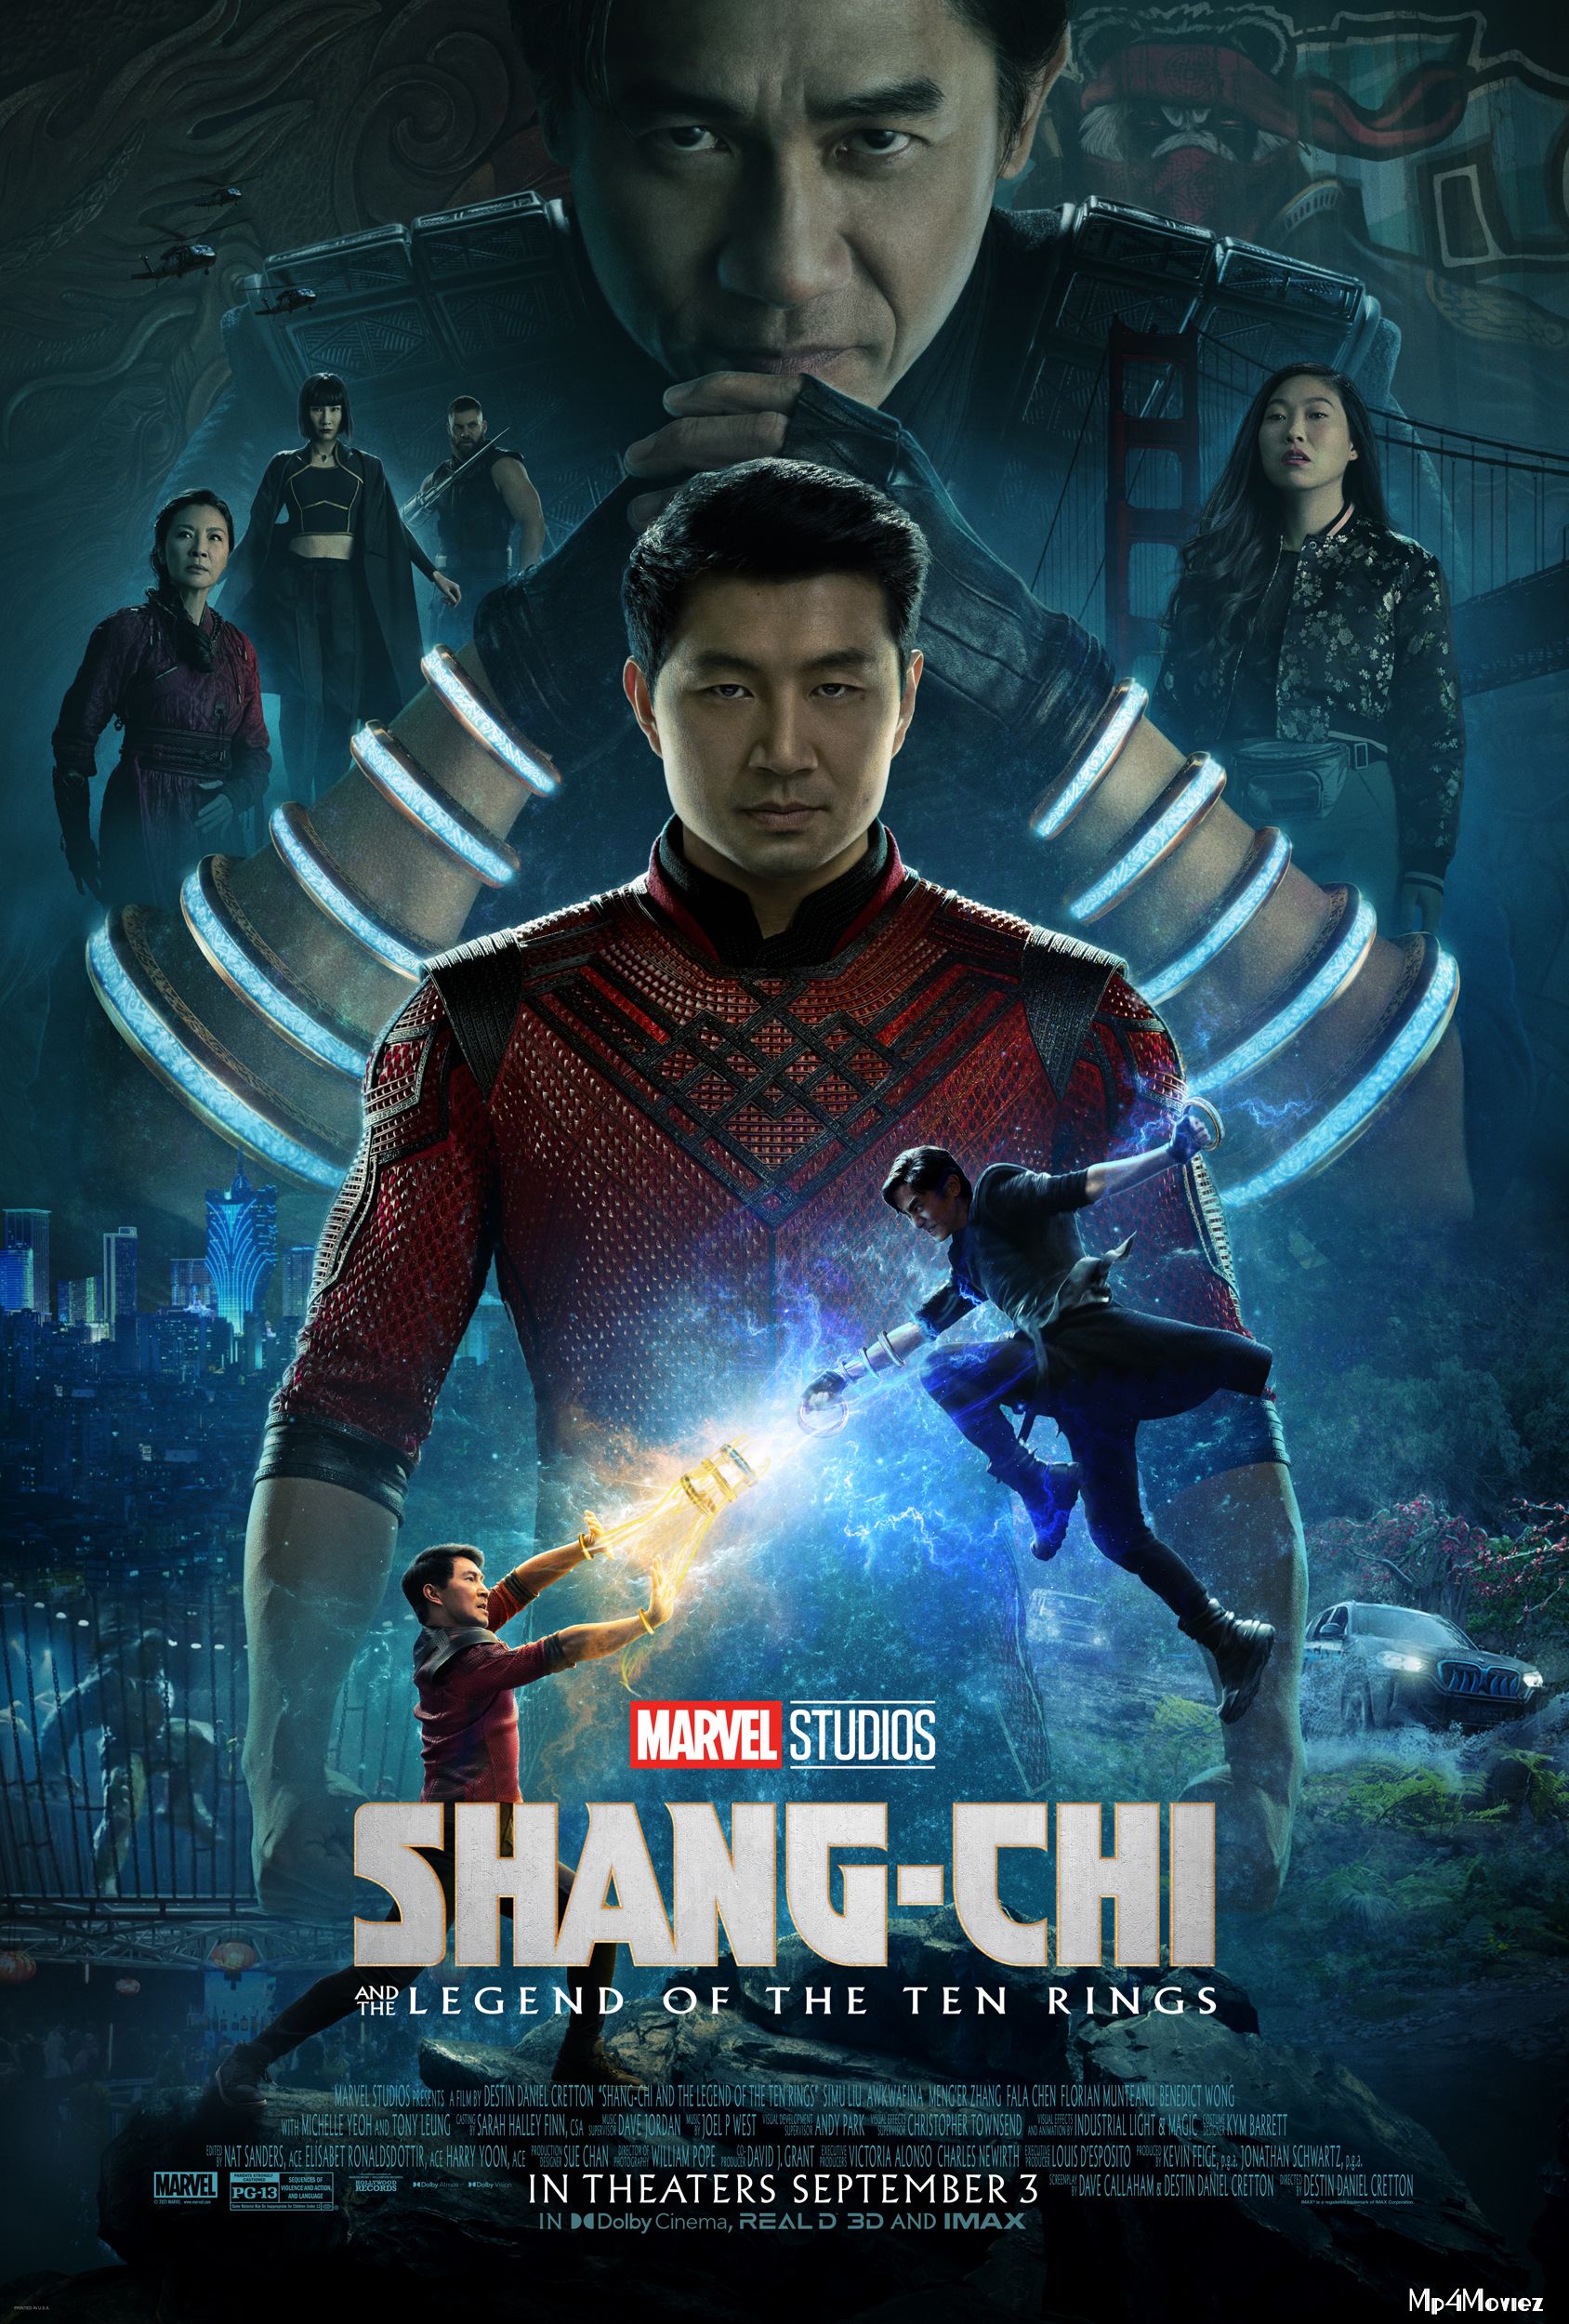 Shang-Chi and the Legend of the Ten Rings (2021) English HDCAM download full movie